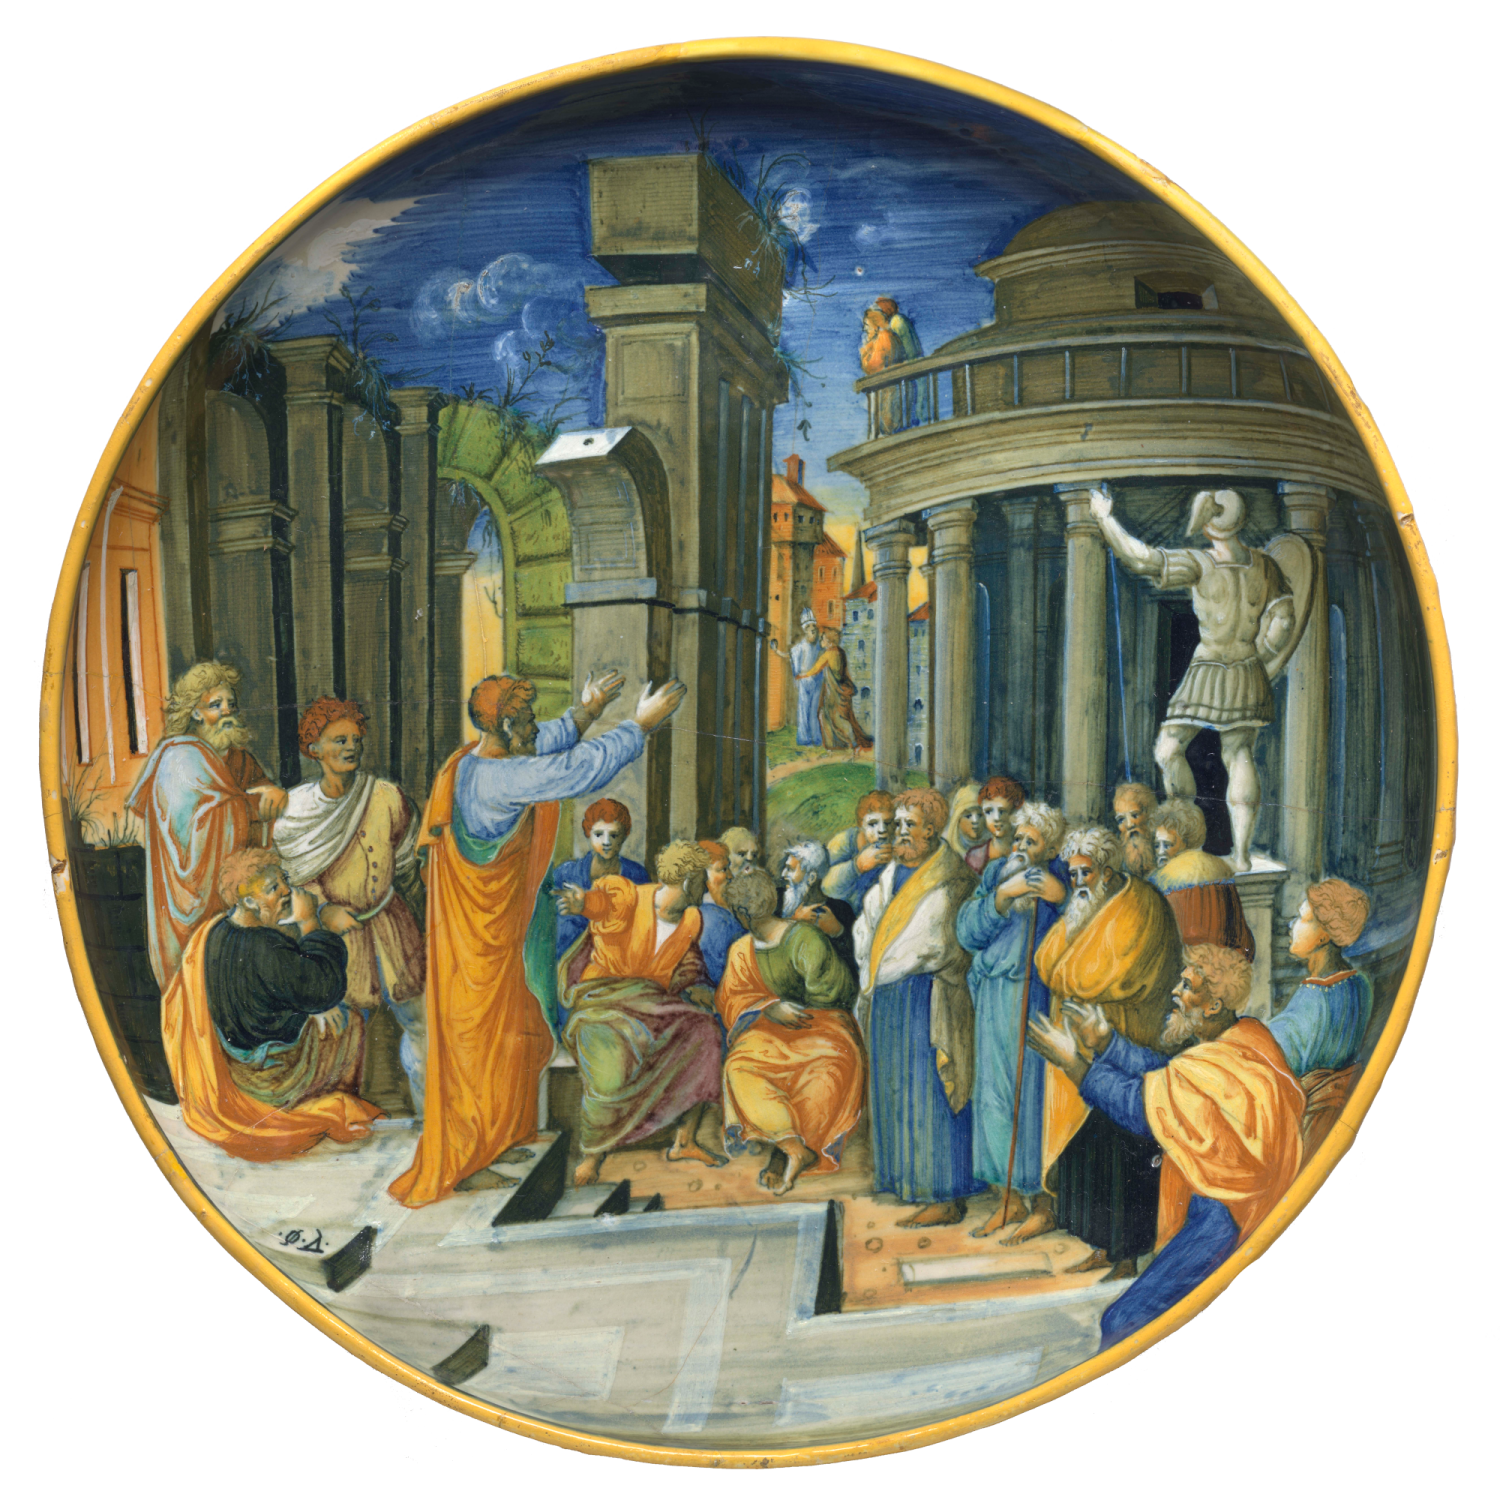 Workshop of Guido Durantino (probably by Orazio Fontana), Plate with Saint Paul Preaching at Athens, c. 1535. Maiolica. National Gallery of Art, Washington, Cocoran Collection (William A. Clark Collection), 2014.136.326